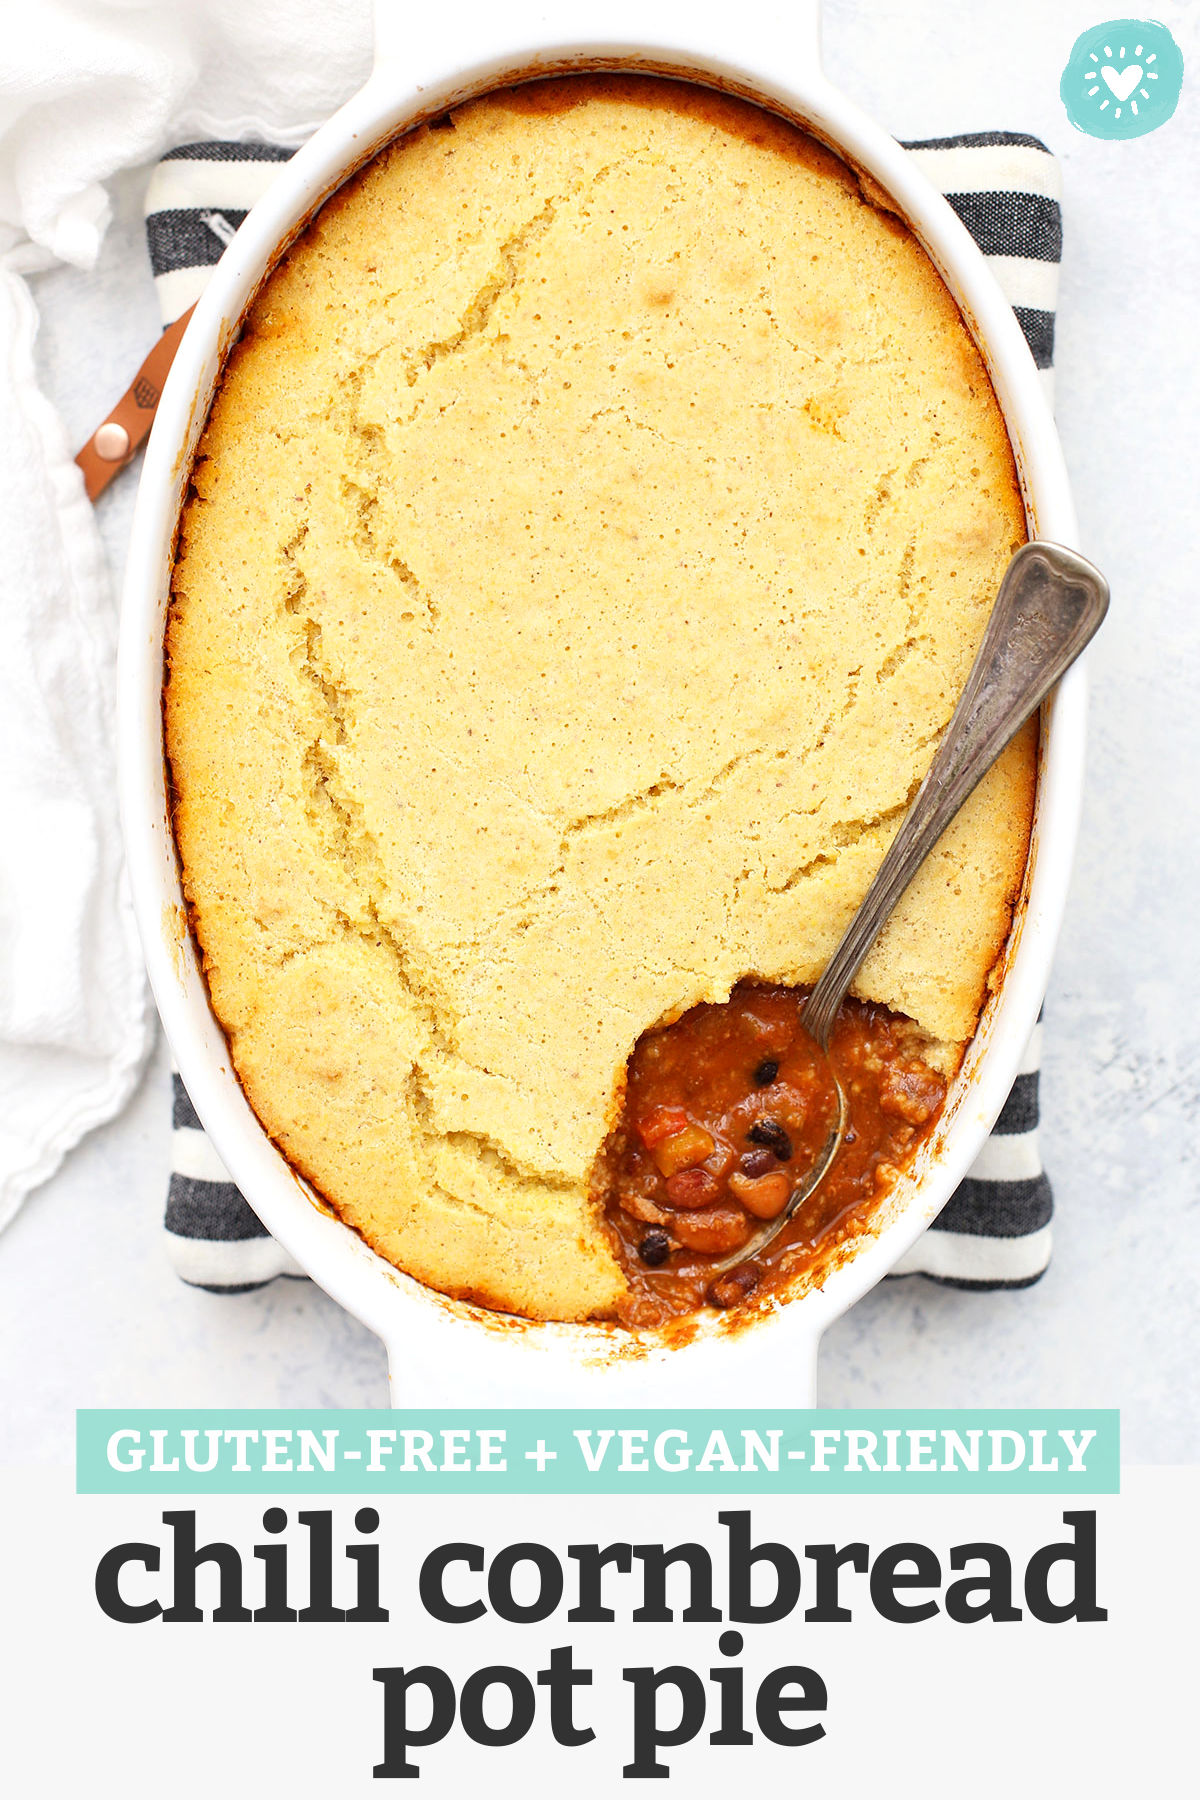 Chili Cornbread Pot Pie - This cozy chili & cornbread pot pie combines two favorites into one delicious meal. Gluten free, dairy free, and easily vegan! // tamale pie recipe // chili and cornbread // vegan chili // vegan cornbread // gluten free chili // gluten free cornbread // chili and cornbread pot pie recipe